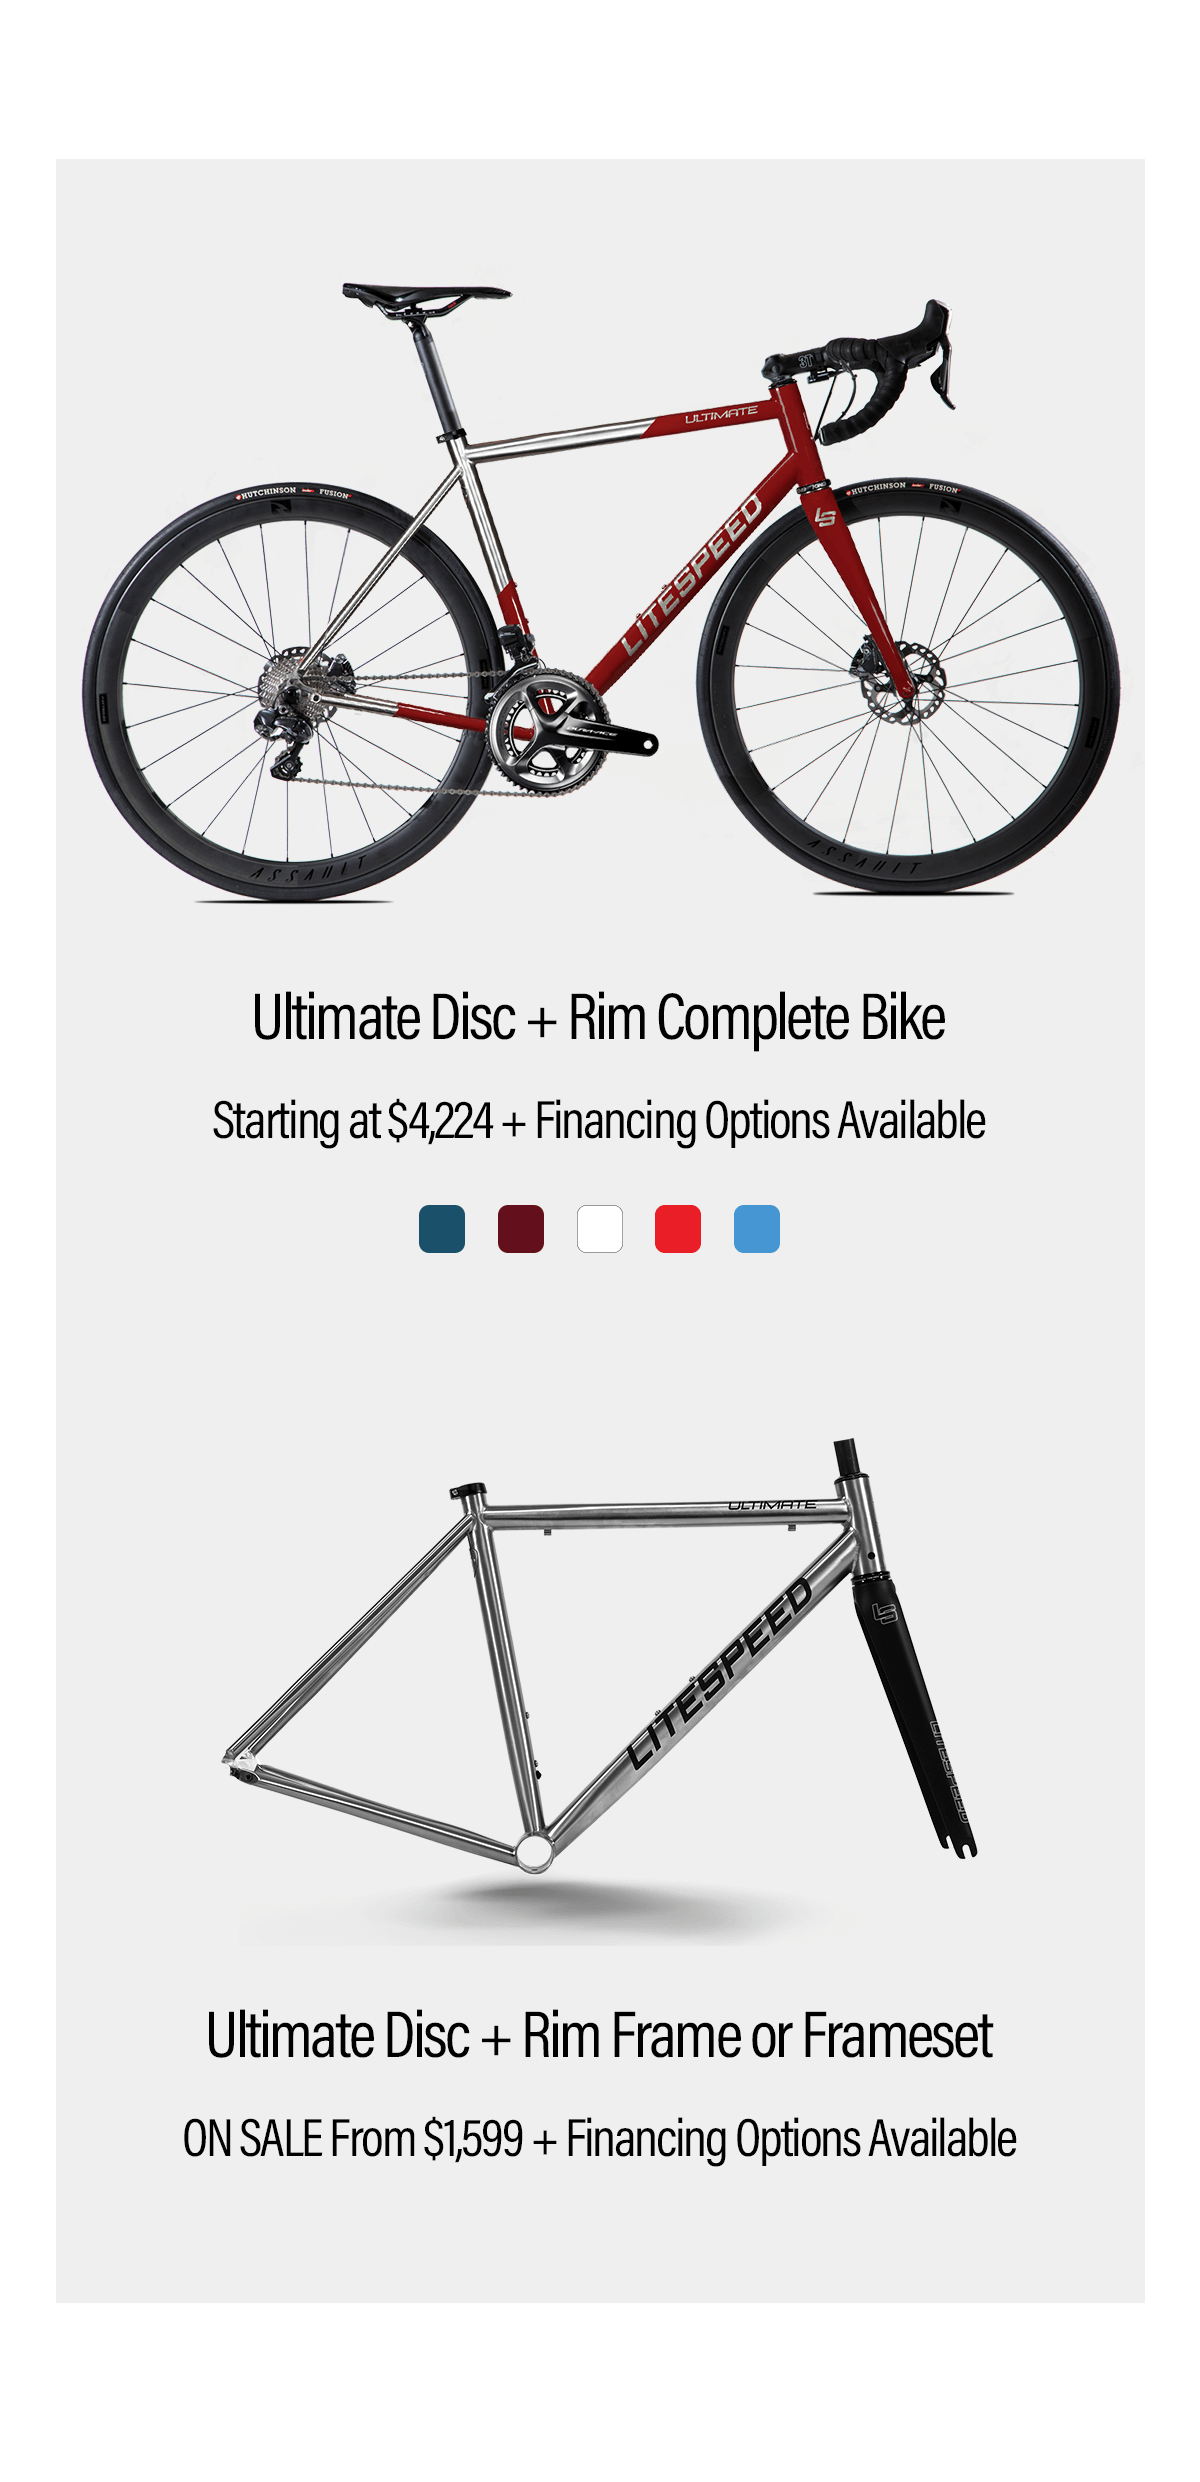 Shop the Ultimate disc + rim complete bike and frame. On sale now!